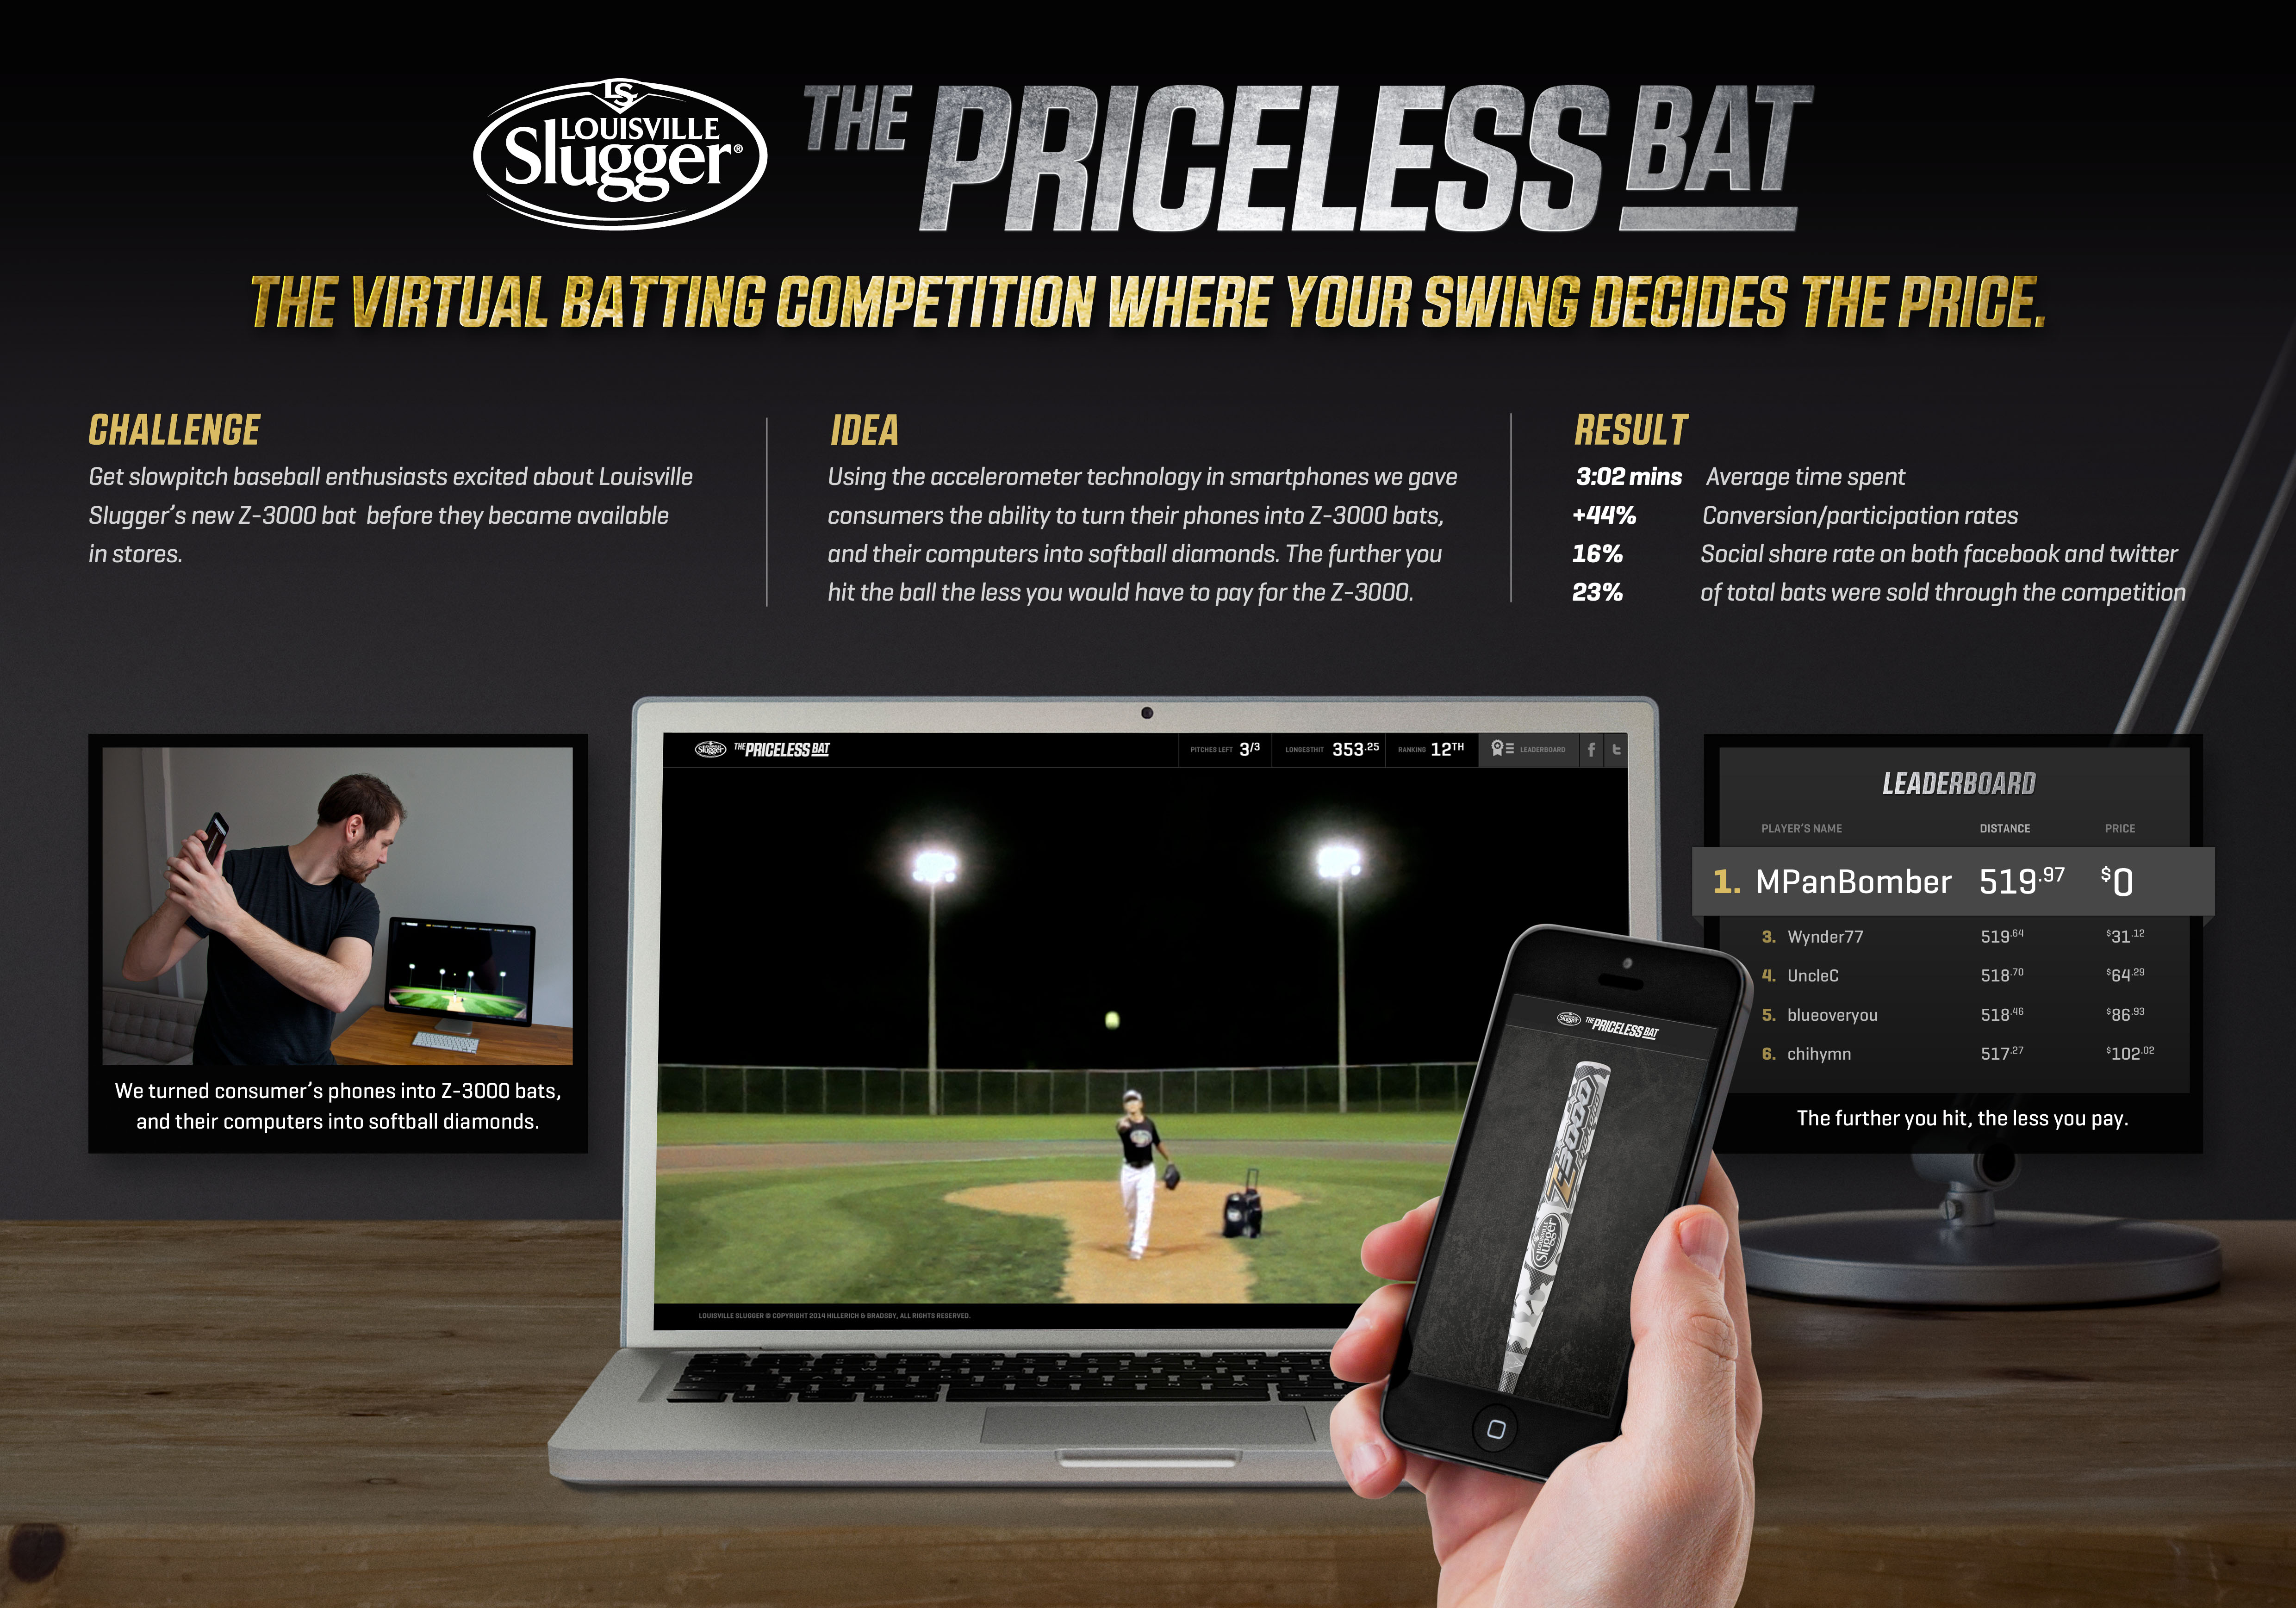 The Priceless Bat campaign image